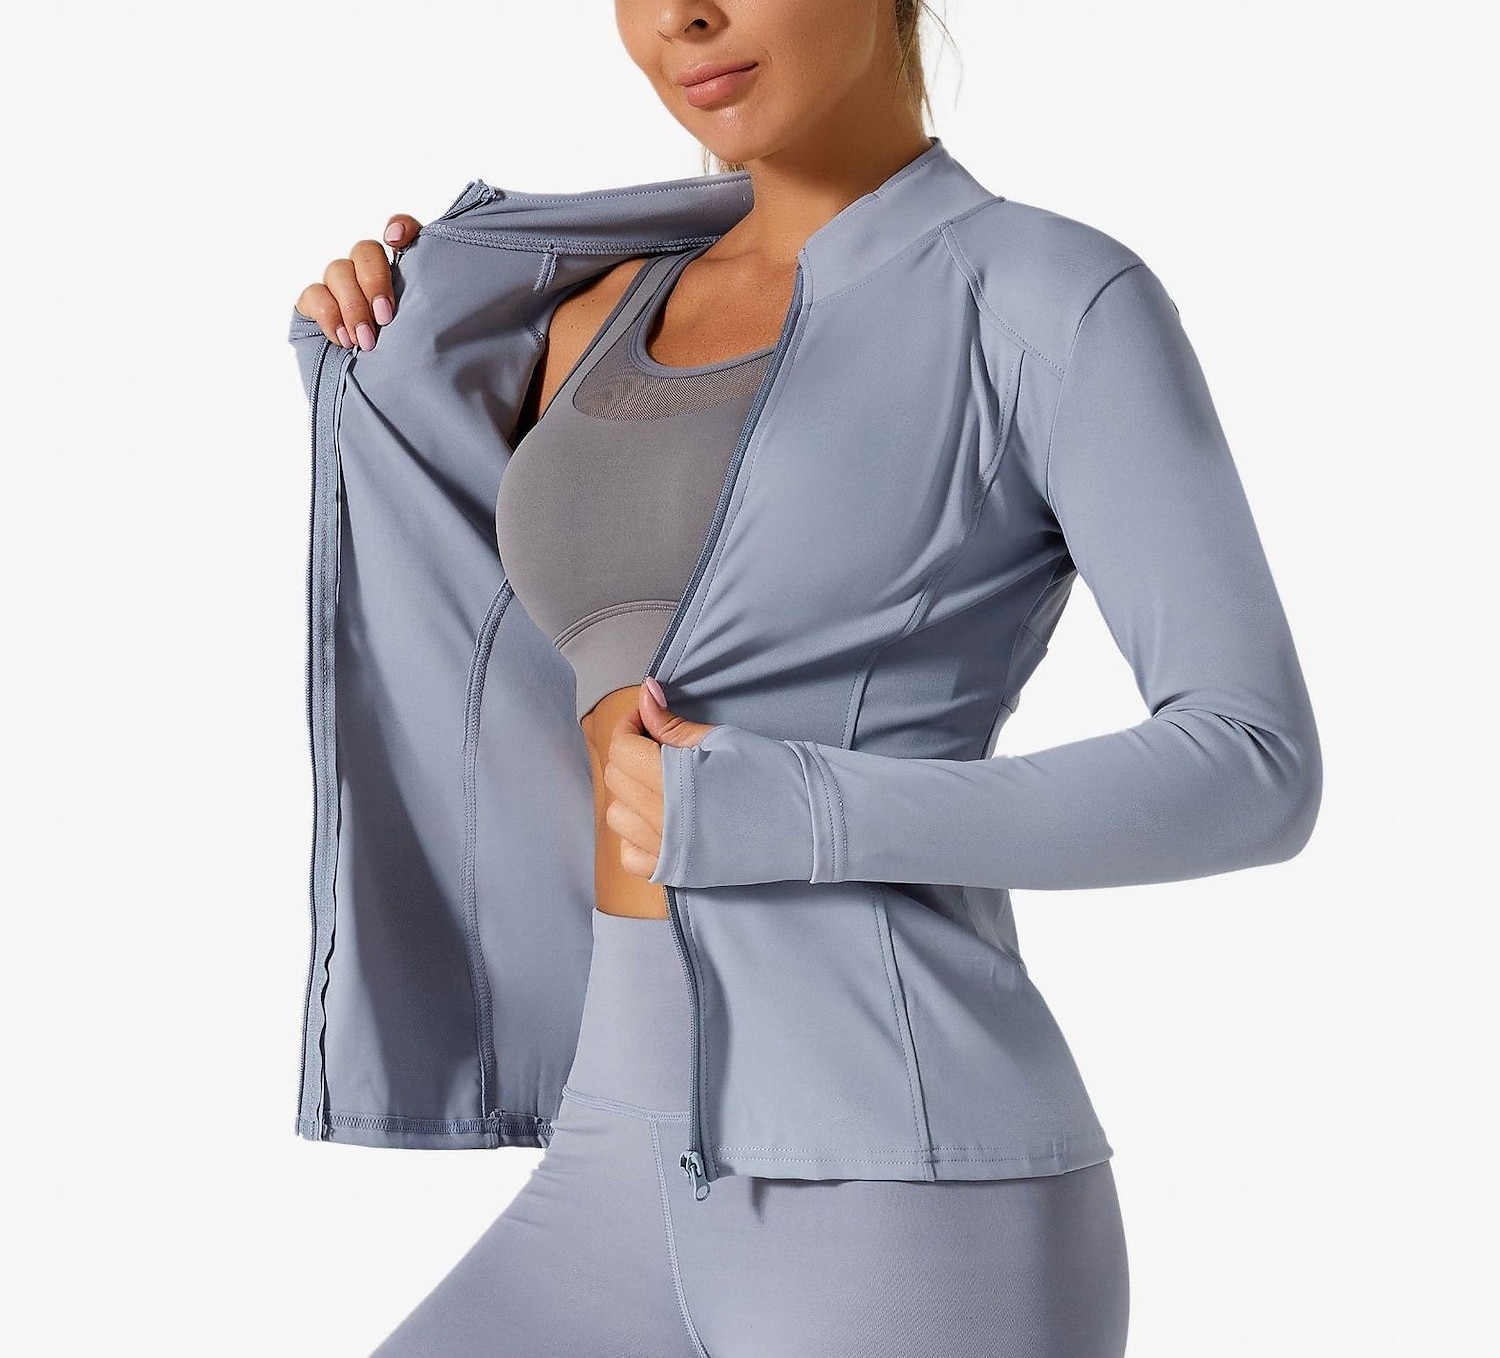 Women's Breathable Quick Drying Long Sleeved Zip Up Active Wear